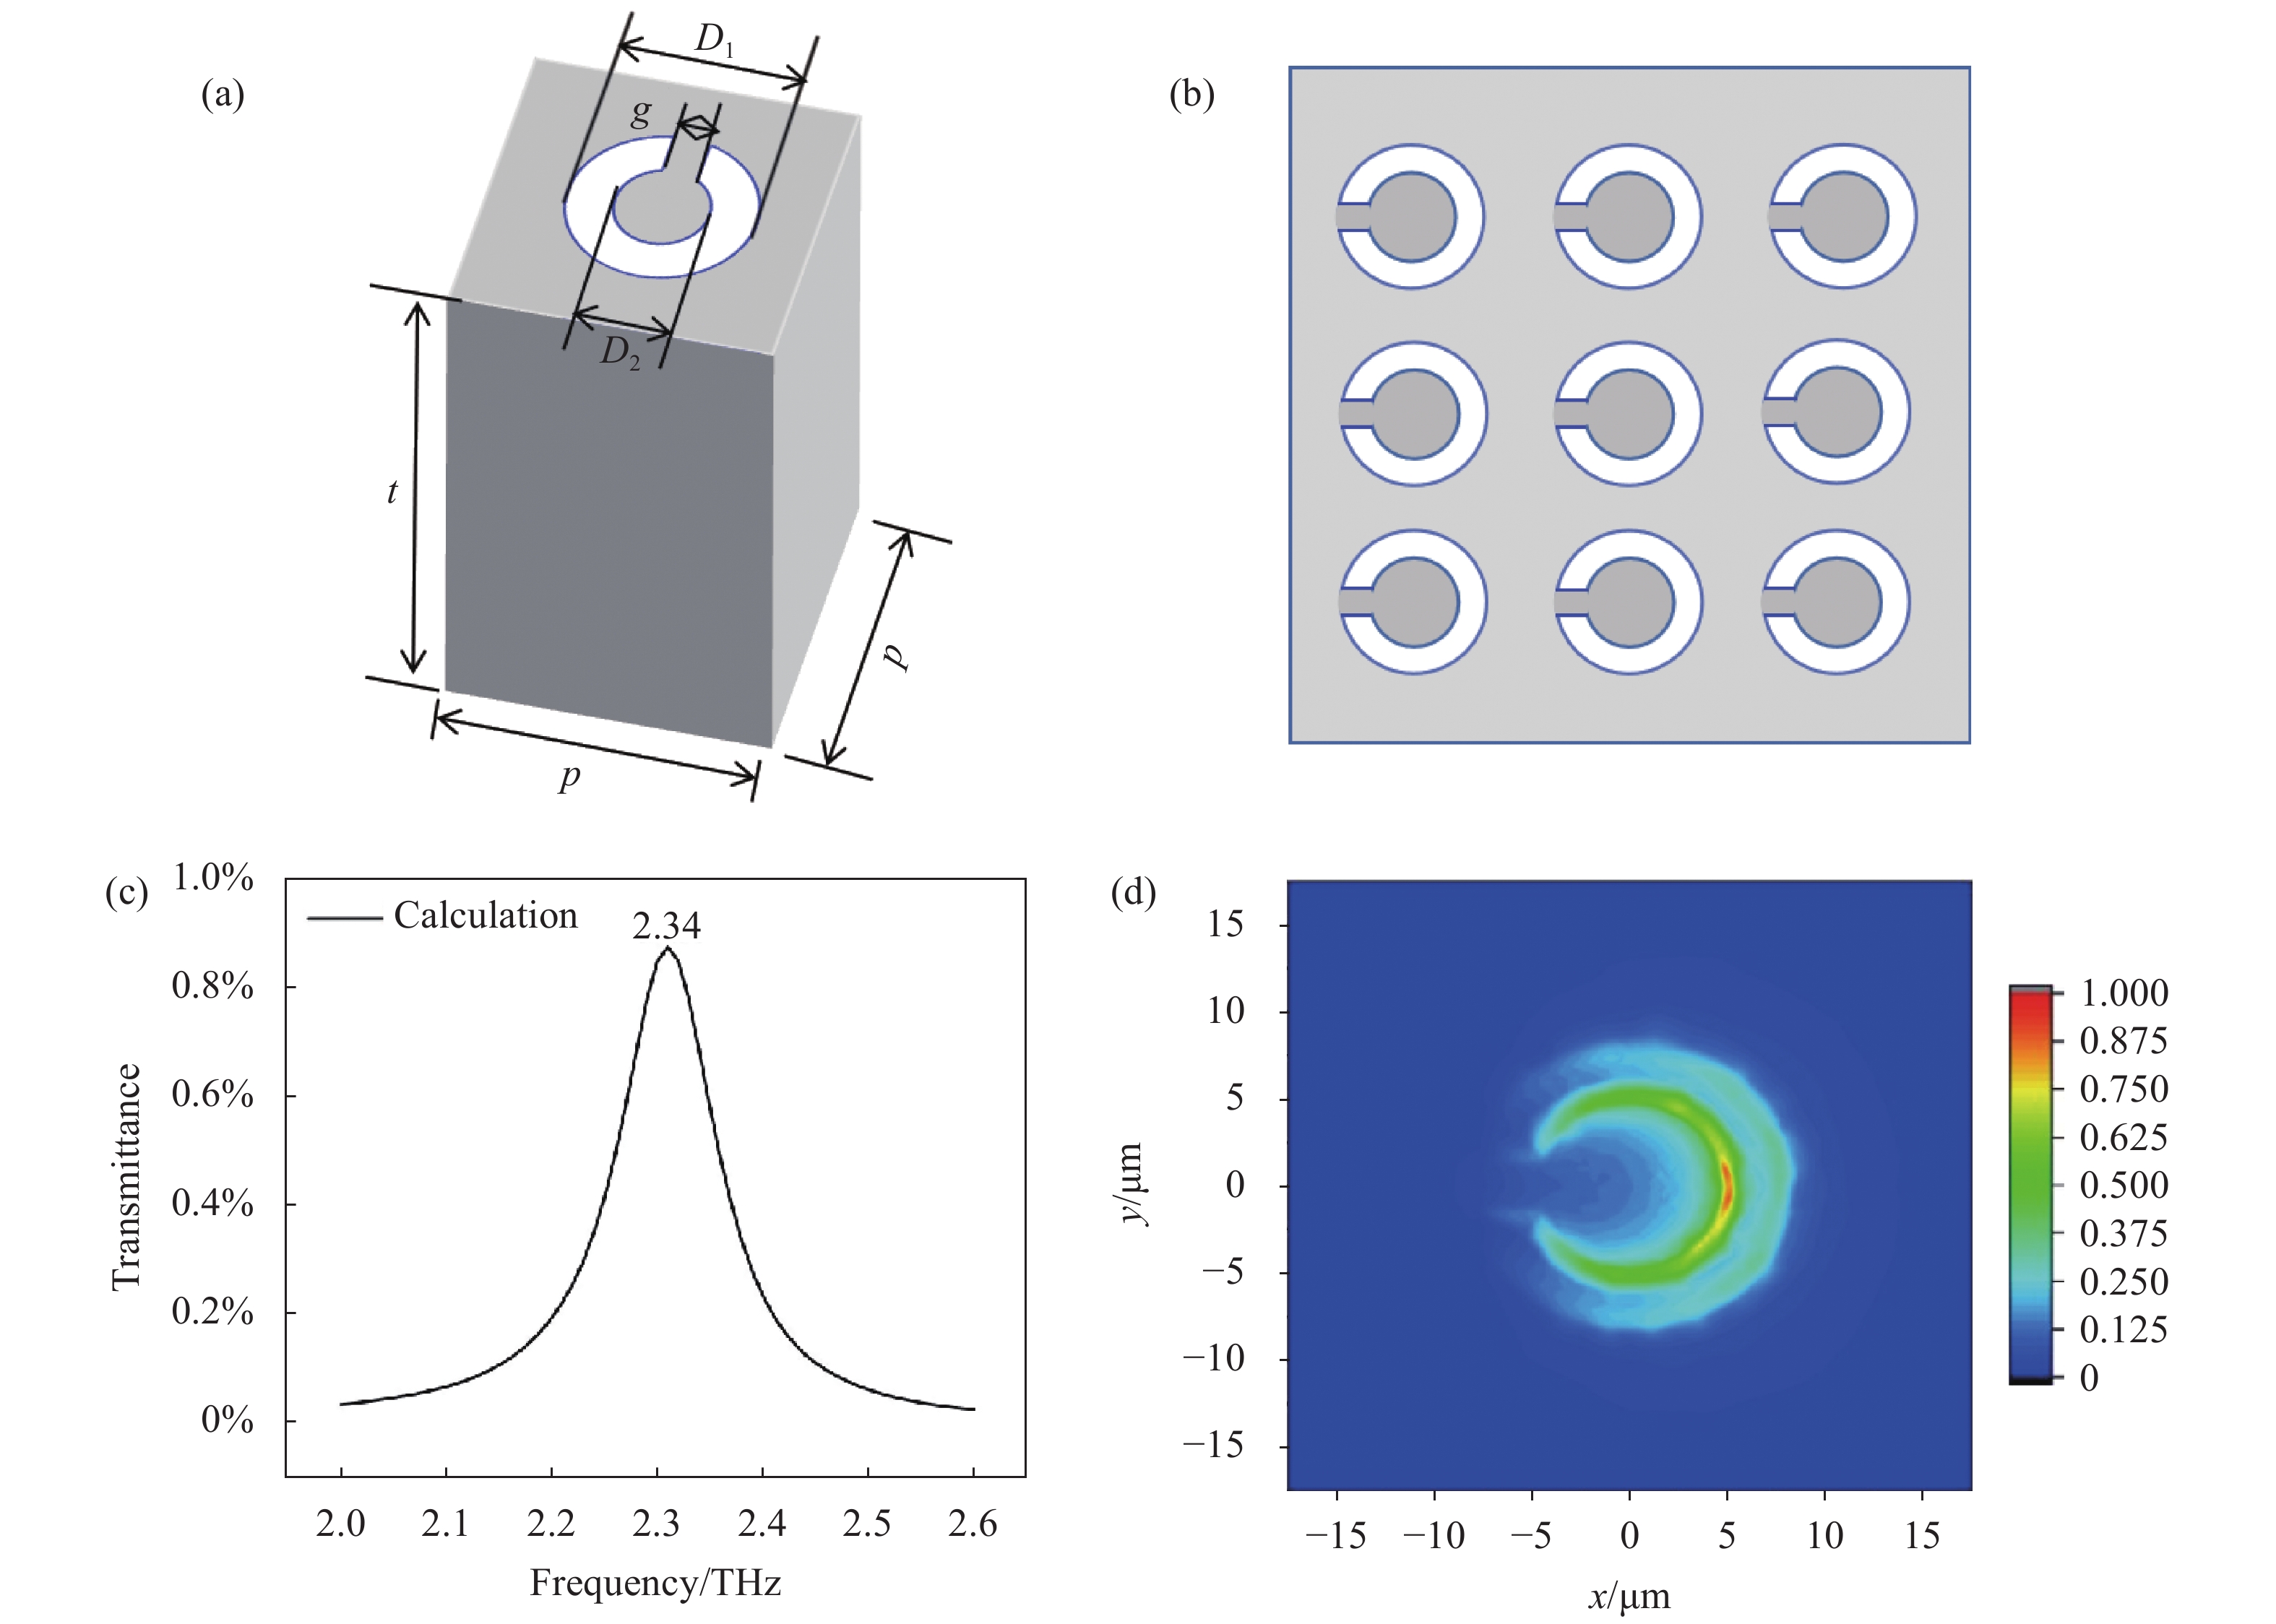 (a) Structure parameters of THz resonant ring chip; (b) Structure multiple layout drawings; (c) Theoretical map data; (d) The normalized electric field distribution calculating by COMSOL